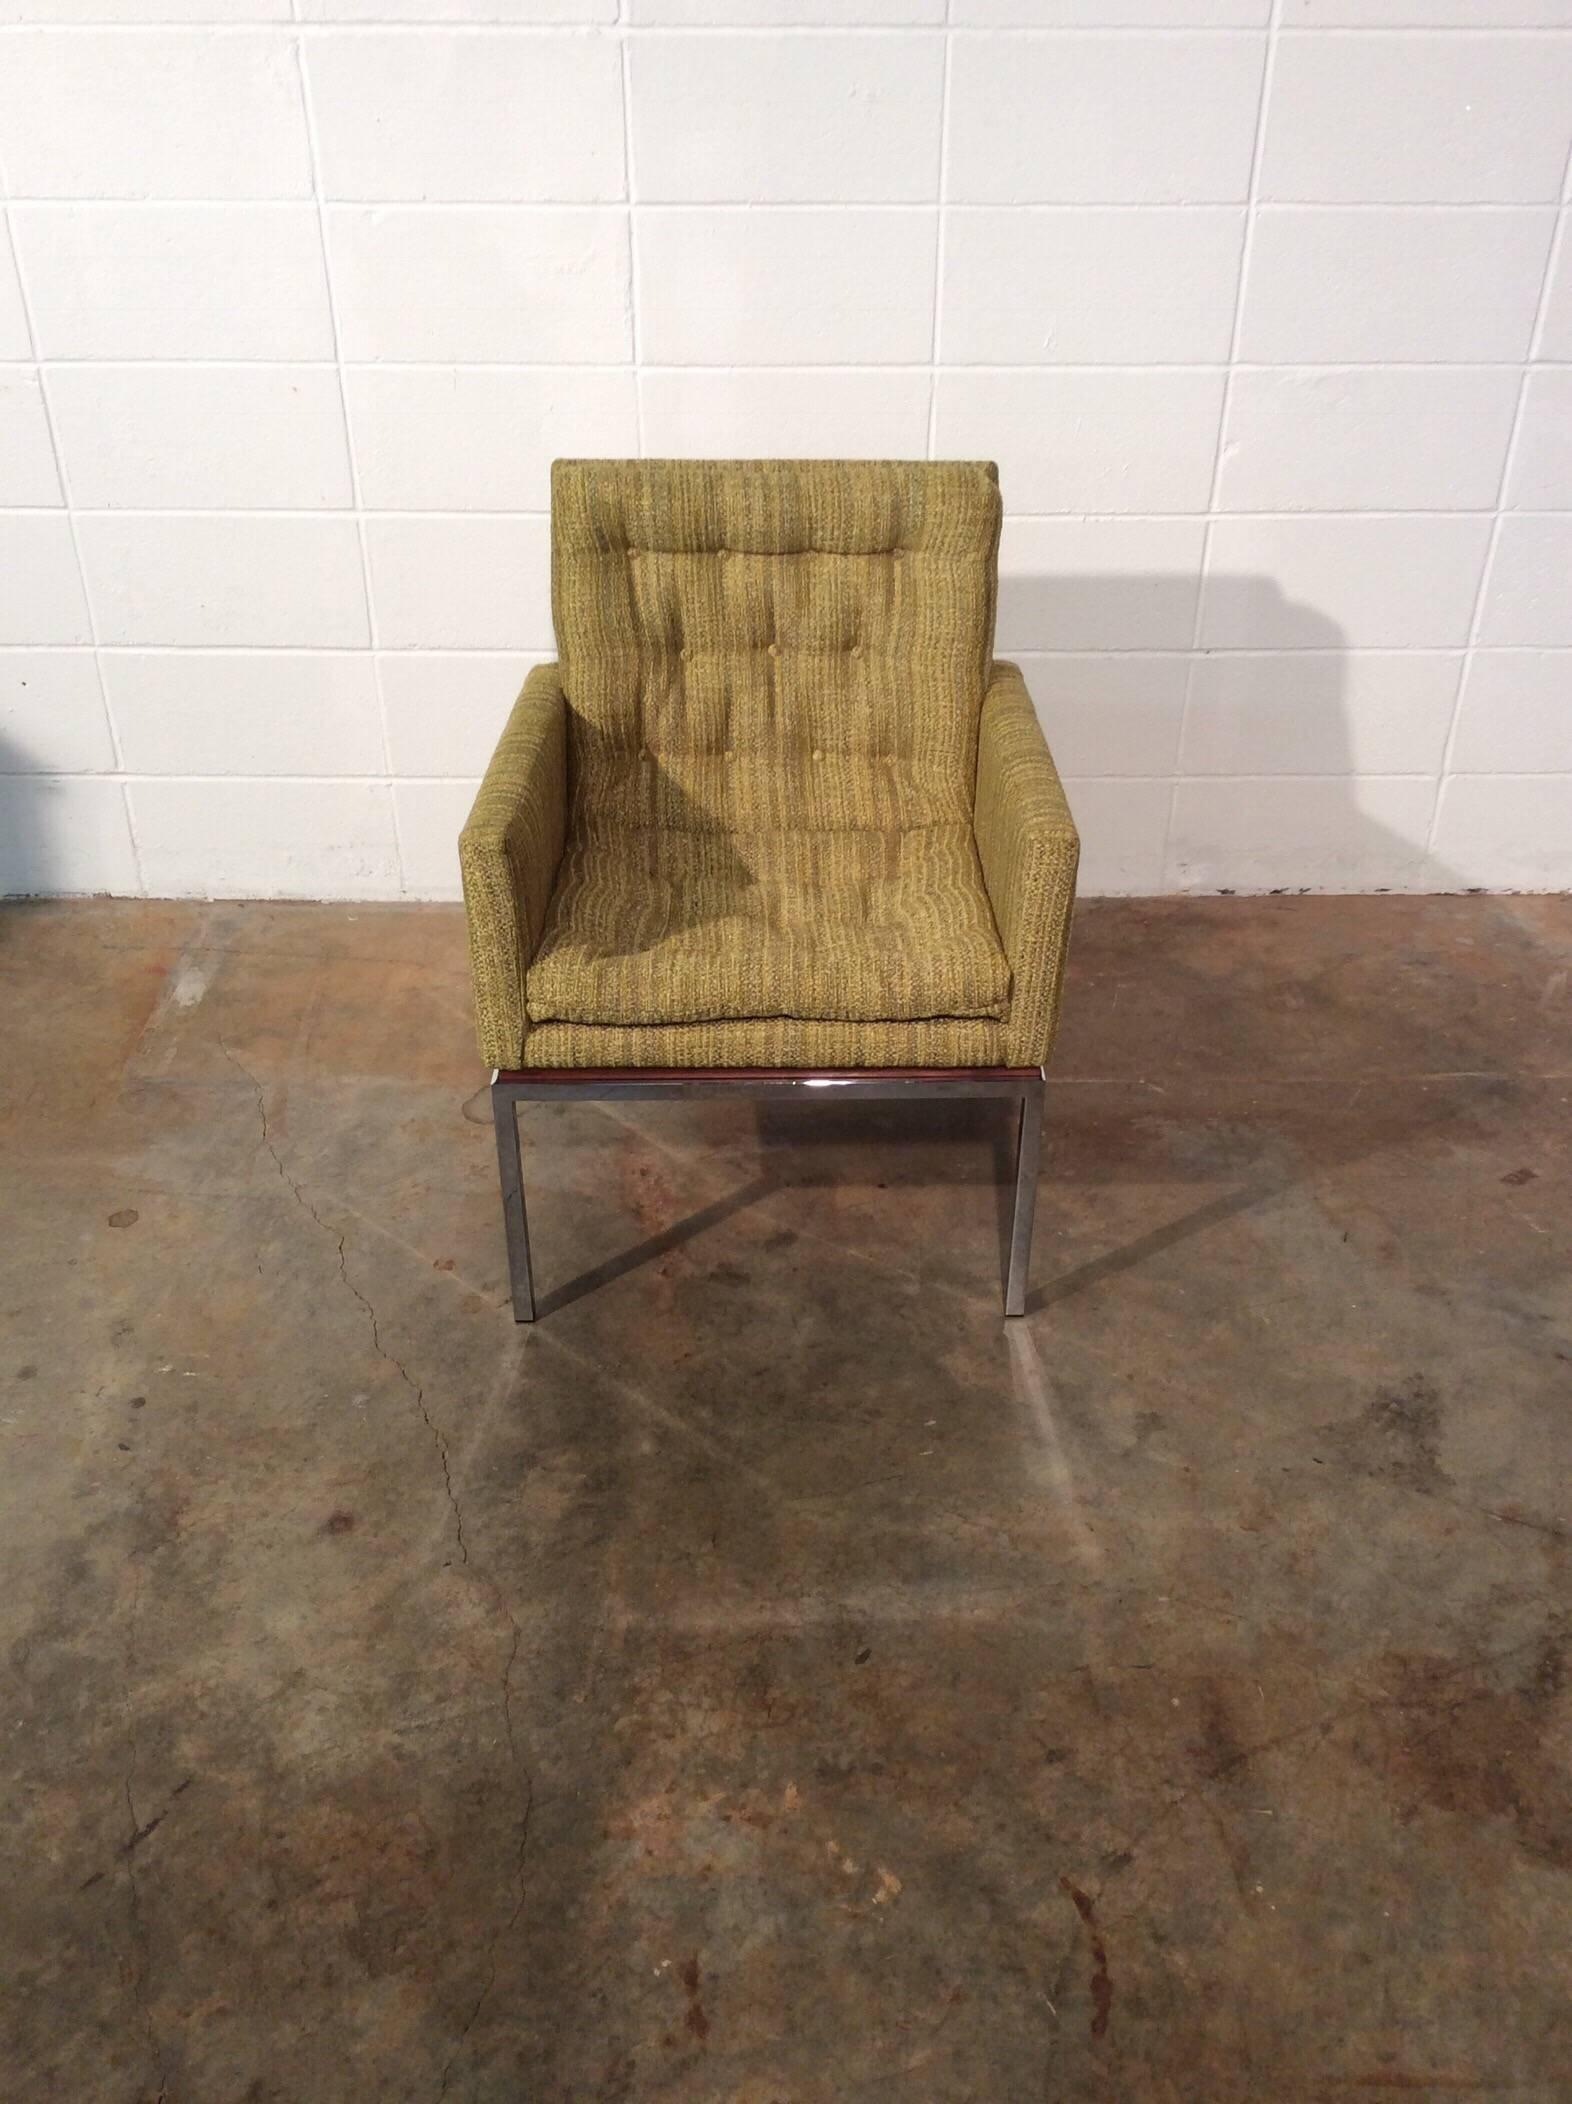 Restored Mid-Century Modern chair on chrome and walnut base by Drexel.
Completely restored cube chair upholstered in a green and multicolor fabric resting on a chrome base.
Restoration includes new foam, new fabric, refinished Walnut spacer, and